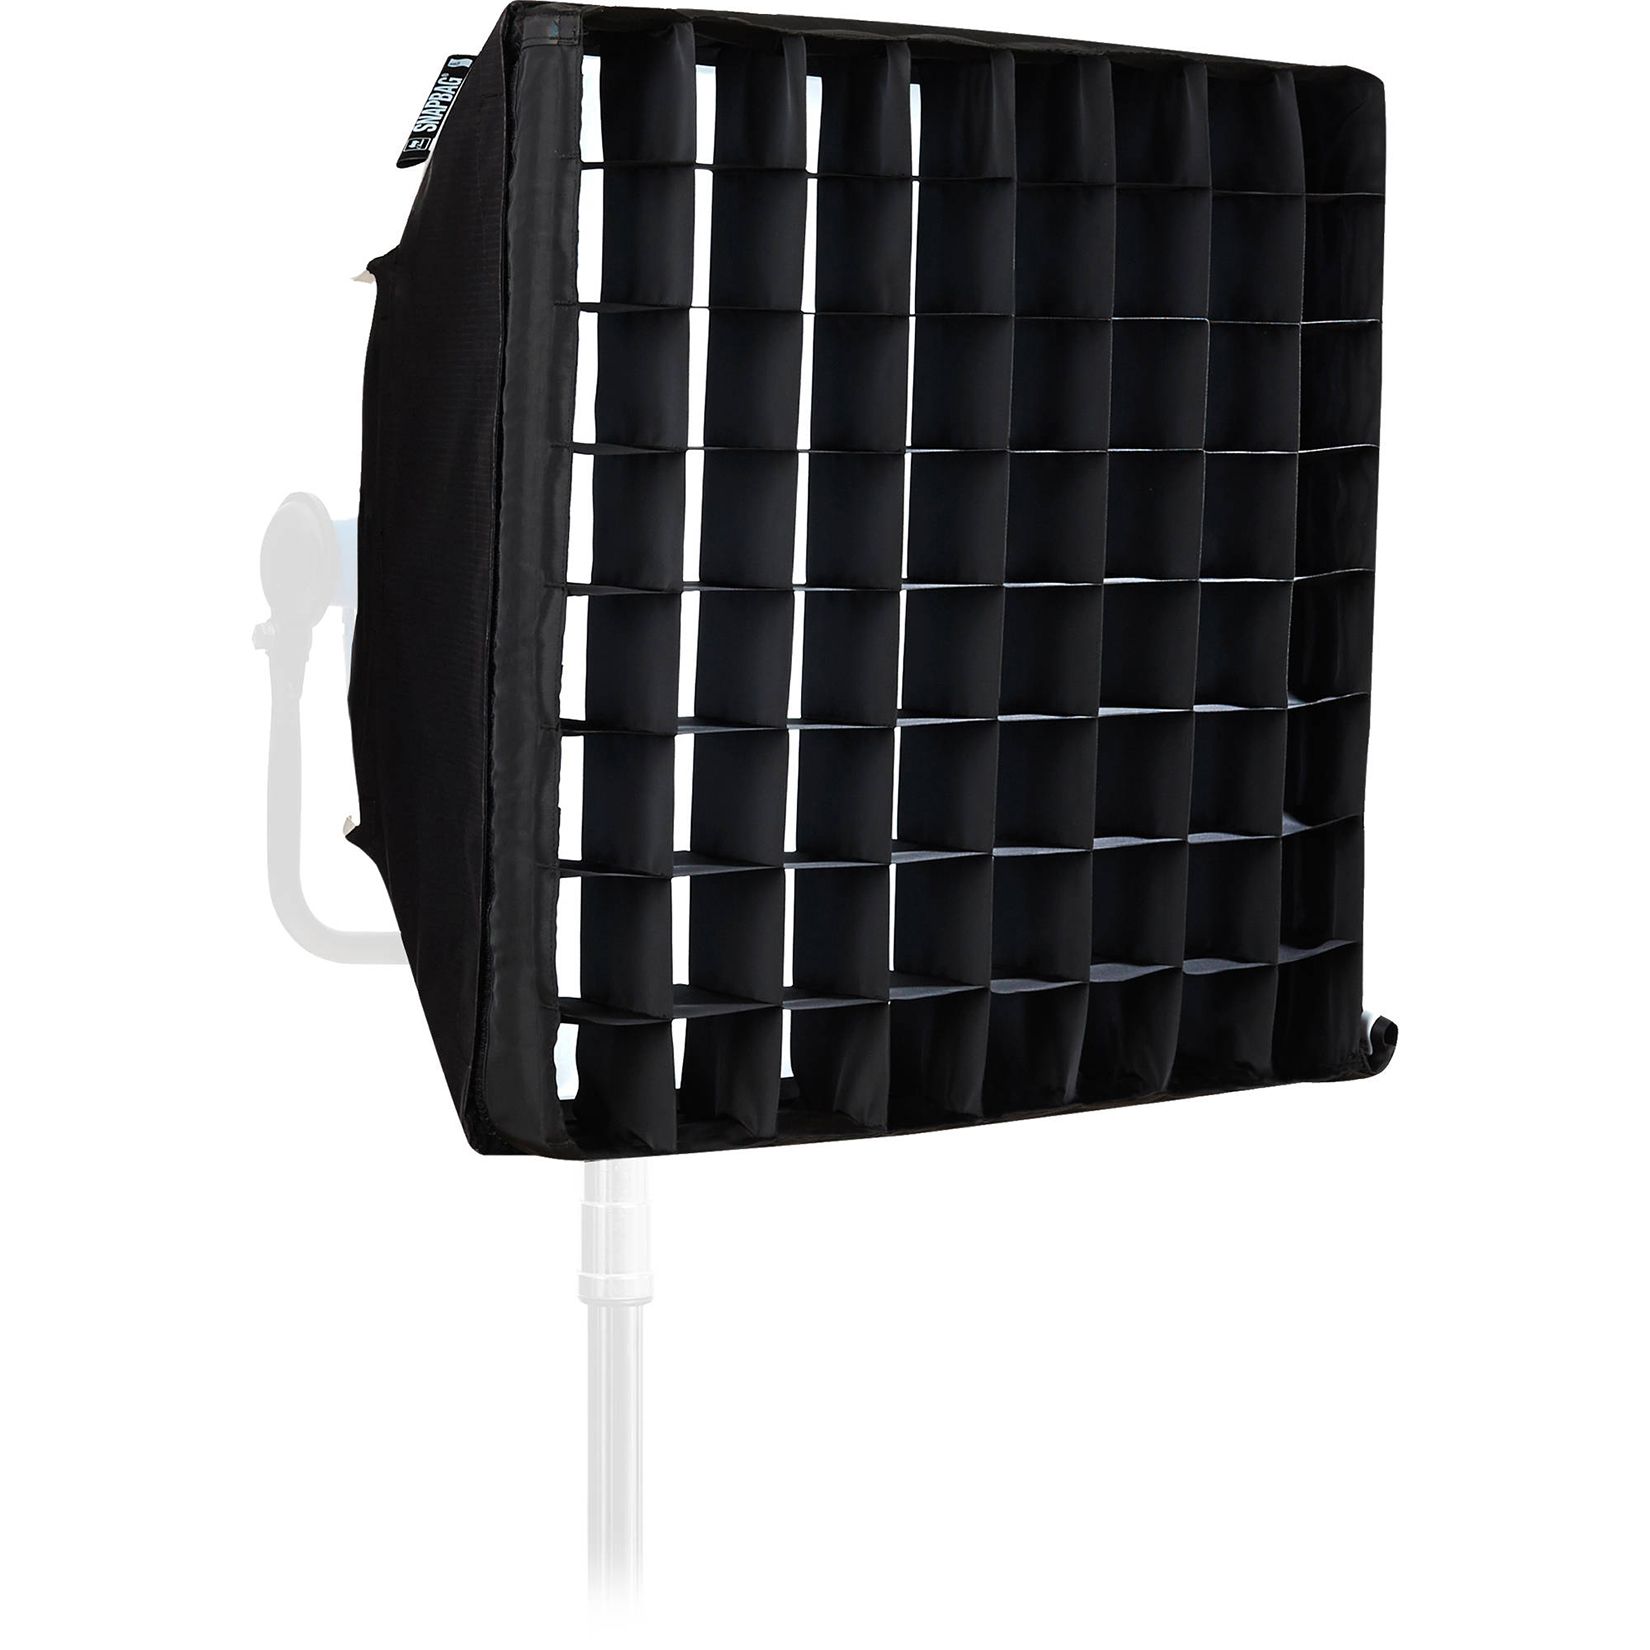 ARRI - DoPchoice SnapGrid 40° pour SnaBag Skypanel S30